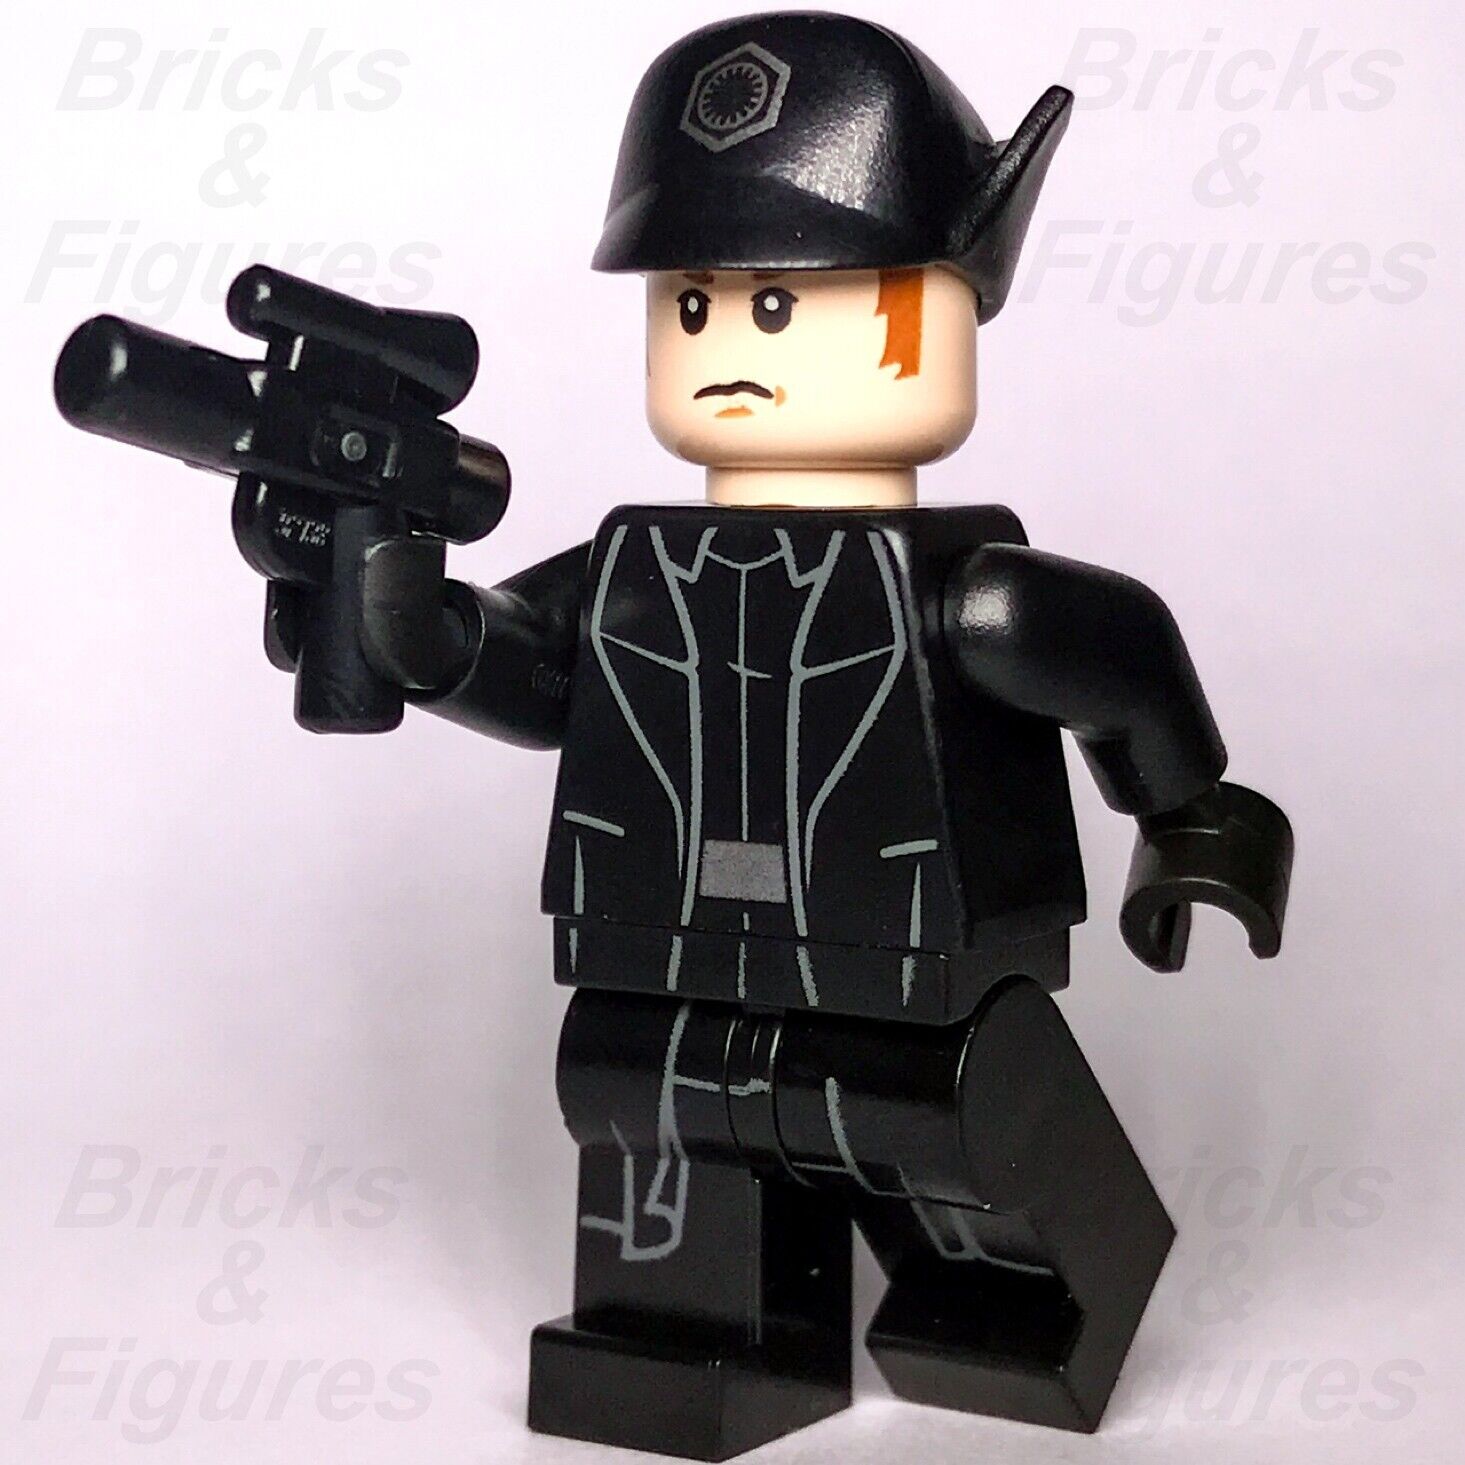 LEGO Star Wars General Hux Minifigure The Force Awakens First Order 75104 sw0662